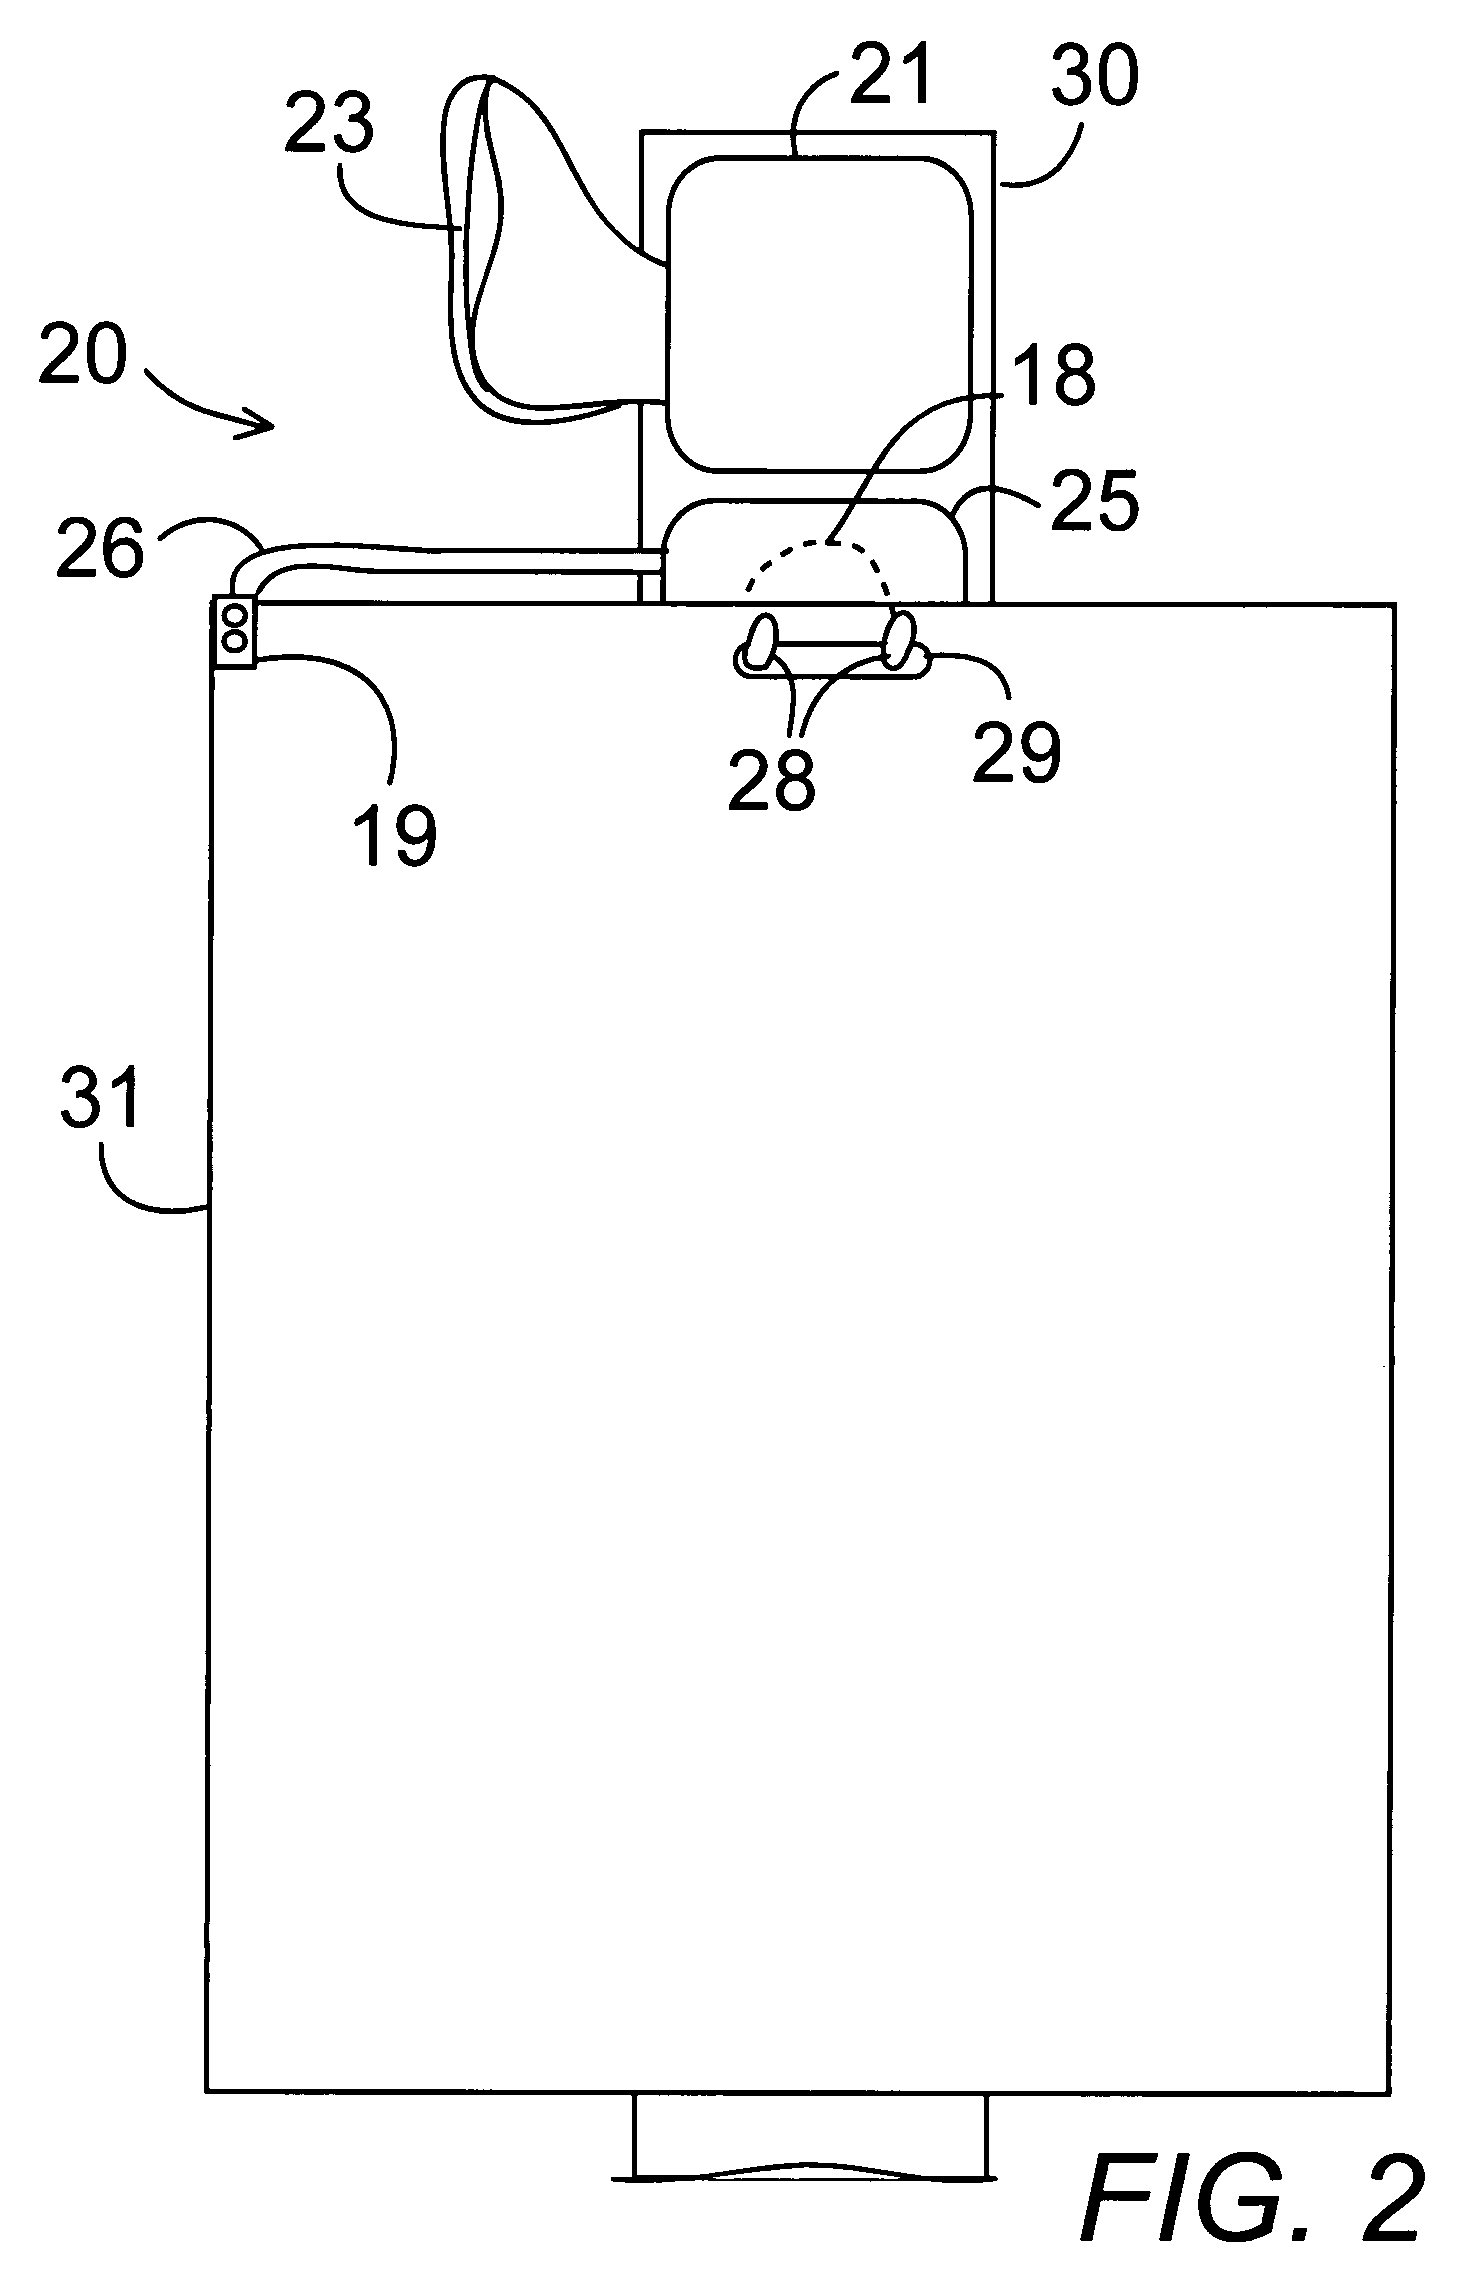 Radiation shield securing and covering system